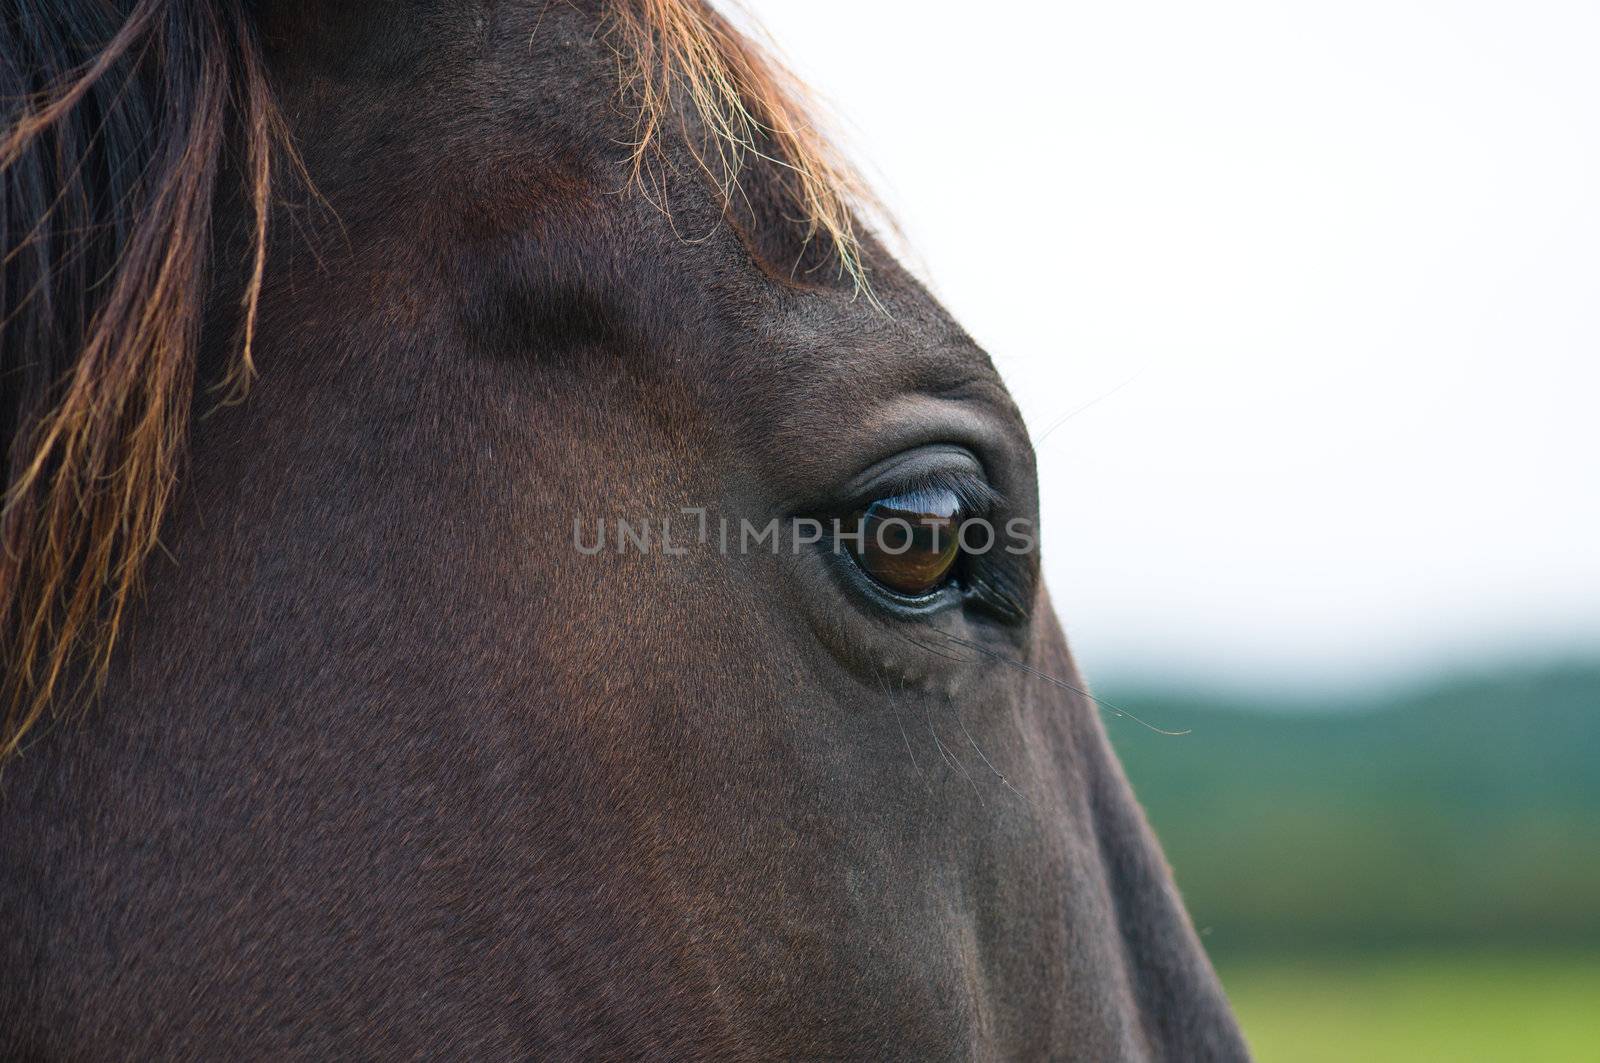 Head of a wild horse in the wilderness on a cloudy day